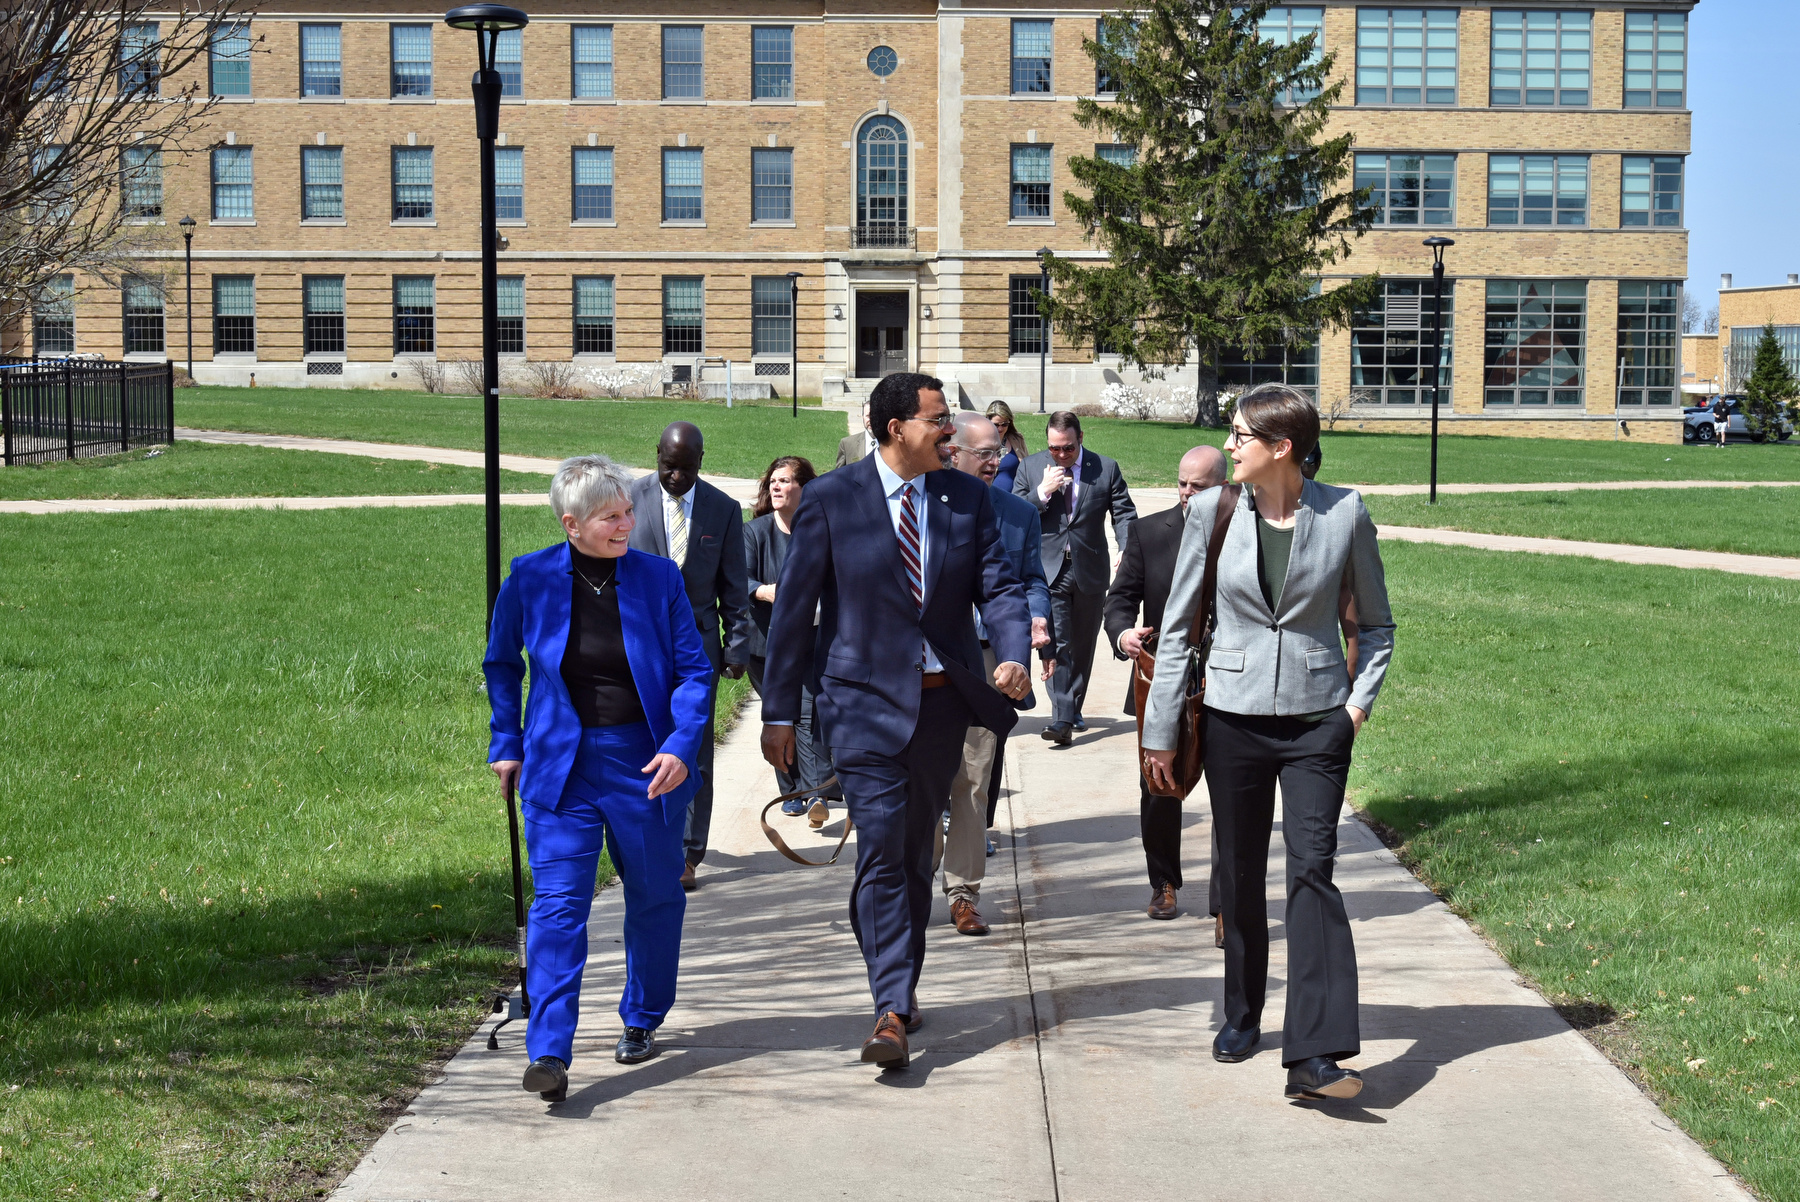 SUNY Chancellor John B. King Jr. visited the SUNY Oswego campus on April 21, meeting with students, touring the campus with faculty and staff, and learning more about the university's programs and facilities. He is pictured here outside Rich Hall talking with SUNY Oswego's Officer in Charge Mary C. Toale and Chief of Staff and Executive Director of Strategic Initiatives, External Partnerships and Legislative Affairs Kristi Eck.